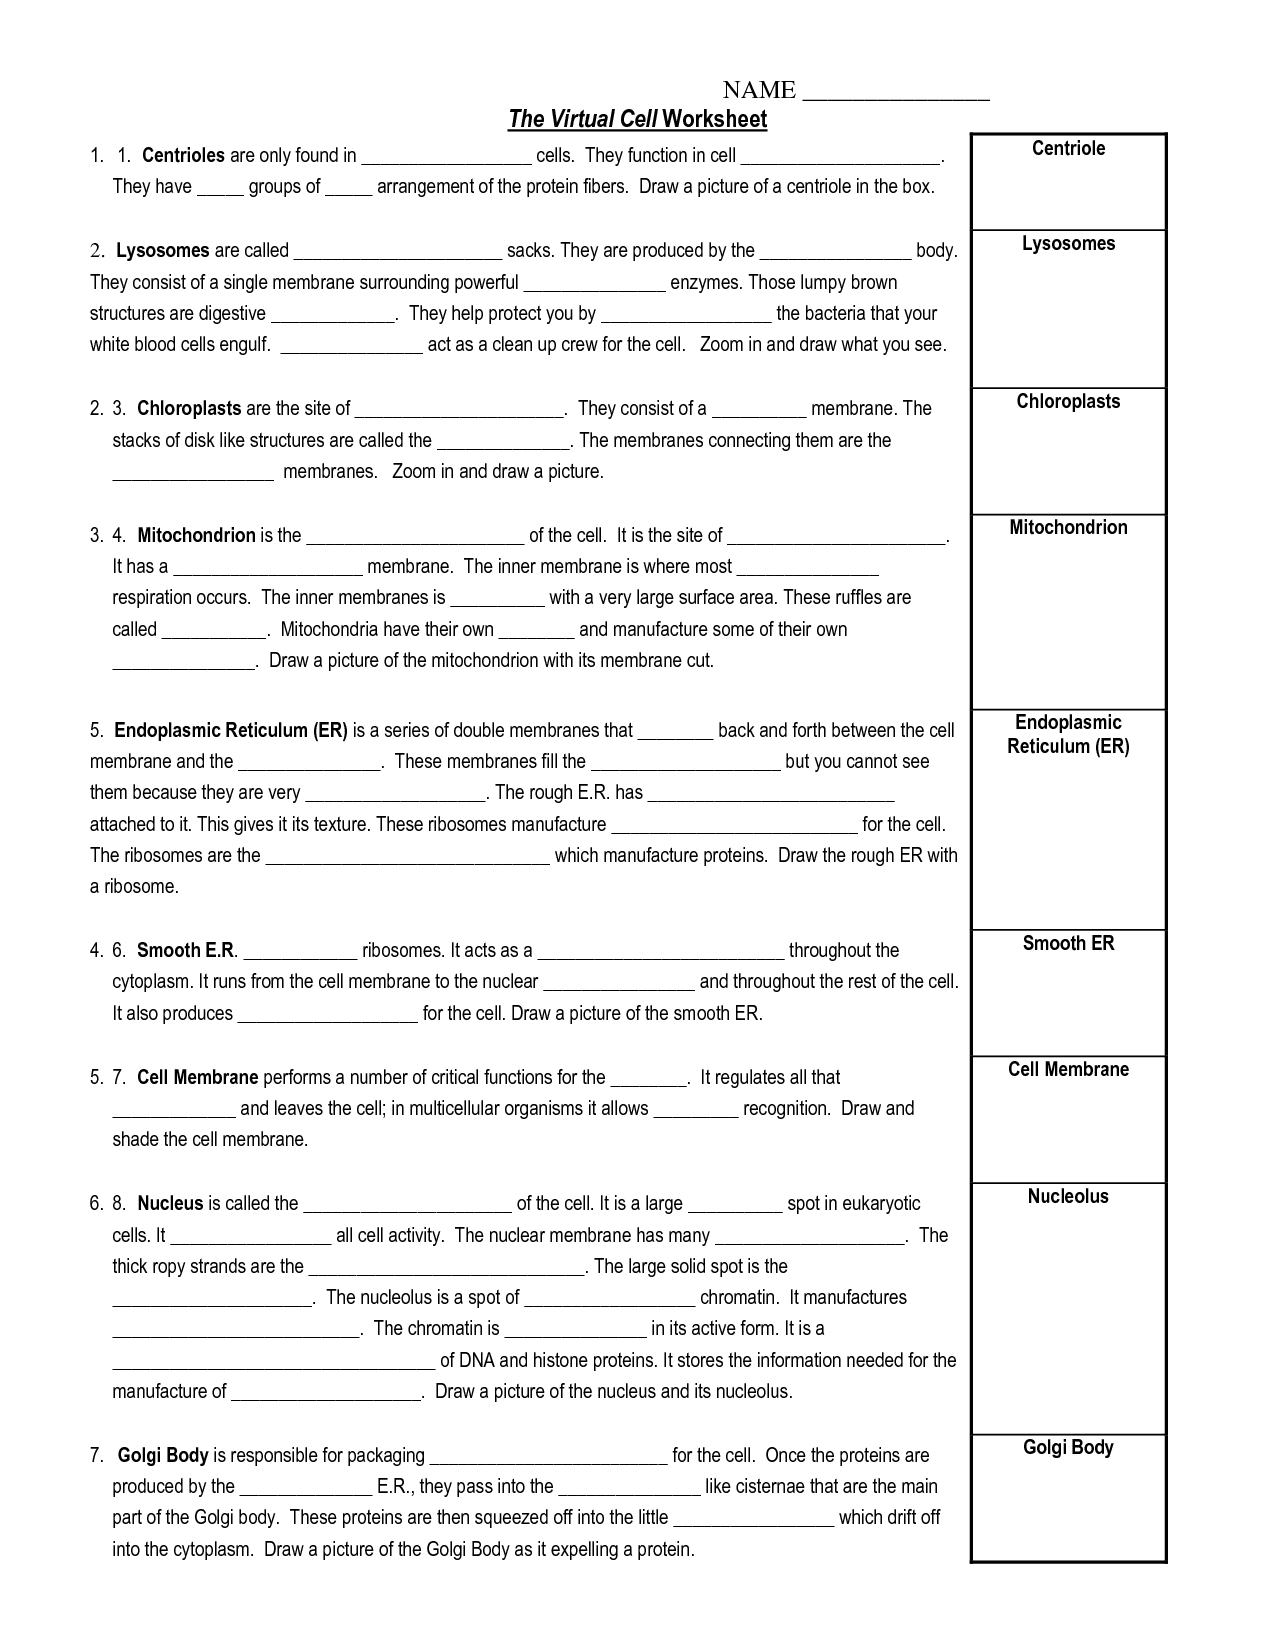 15-best-images-of-blood-cells-and-functions-worksheets-blood-cells-worksheet-virtual-cell